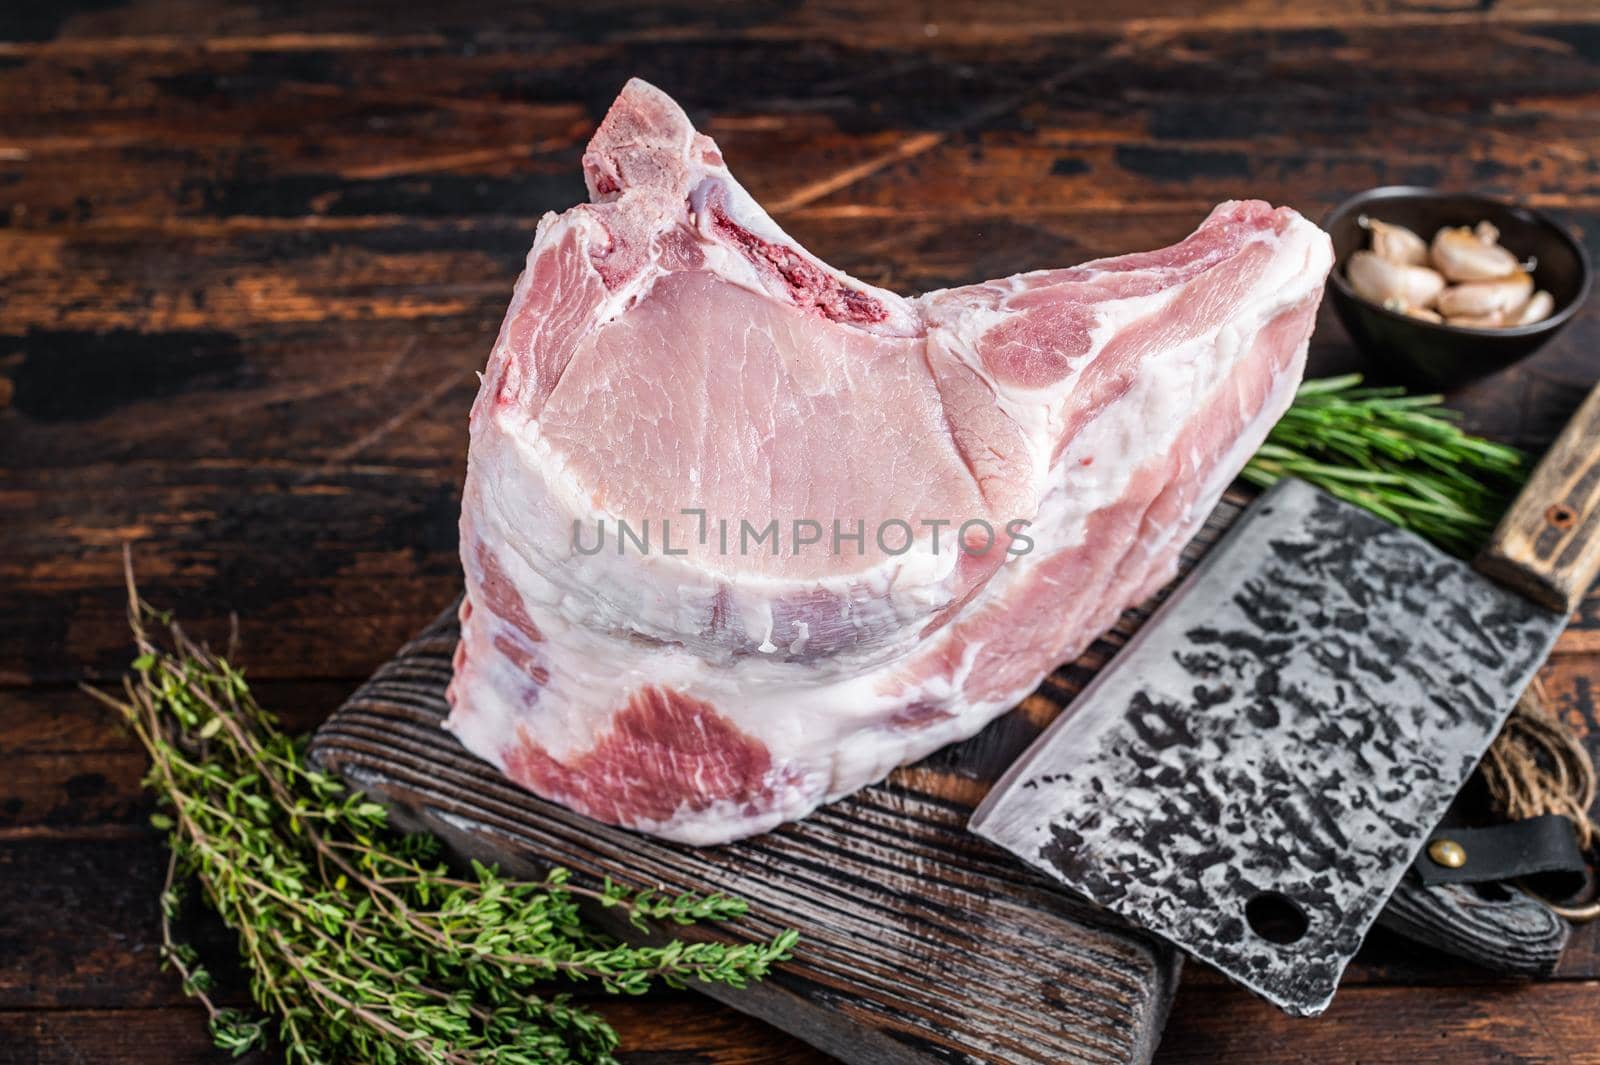 Raw rack of pork loin chops with ribs on a butcher board with meat cleaver. Dark wooden background. Top view by Composter